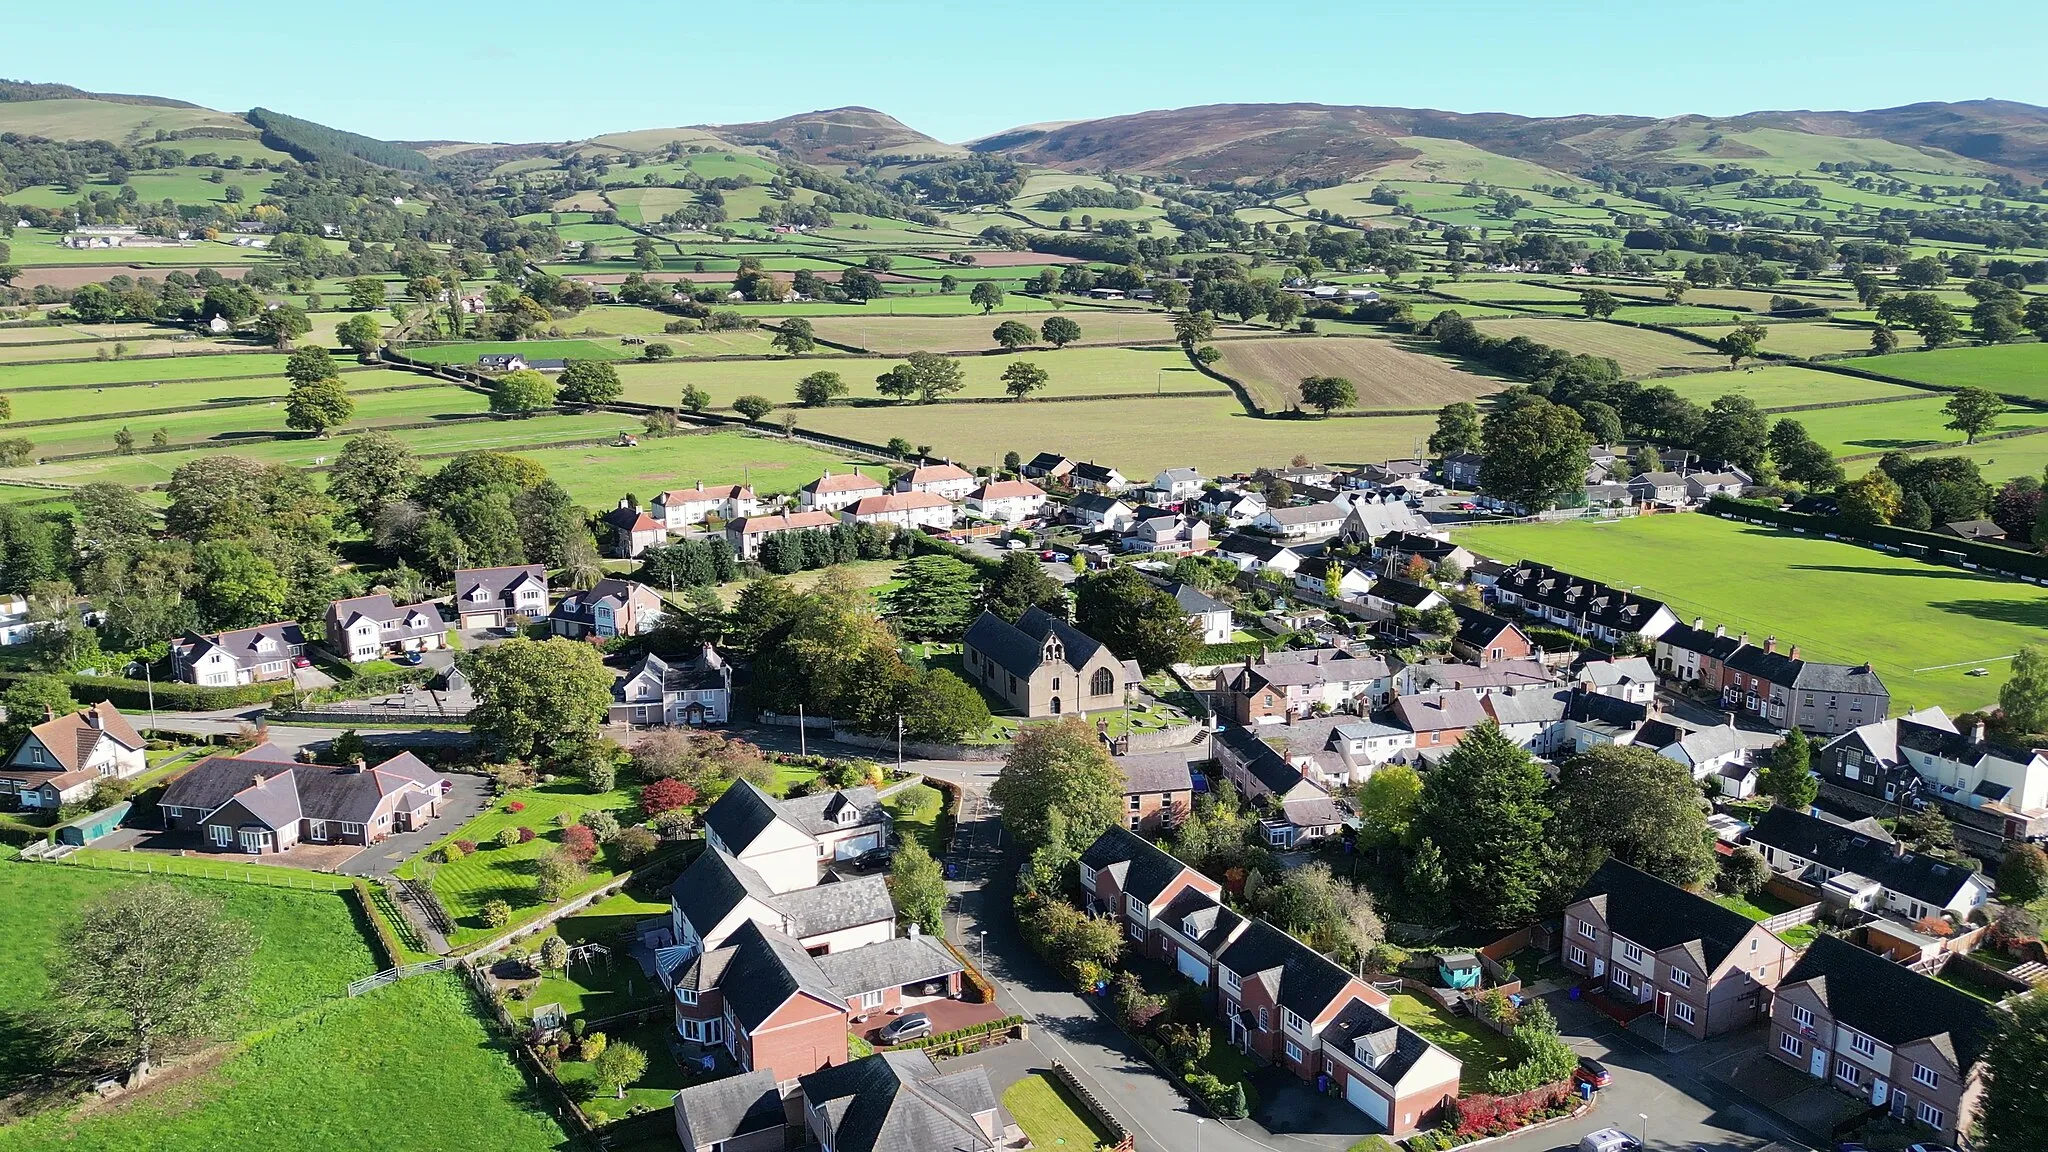 Photo showing: Llandyrnog is a large village and community in Denbighshire, Wales lying in the valley of the River Clwyd, about 3 miles (4.8 km) from Denbigh and 5 miles (8.0 km) from Ruthin.  The village contains the Church of St. Tyrnog's is a Grade II* listed building.